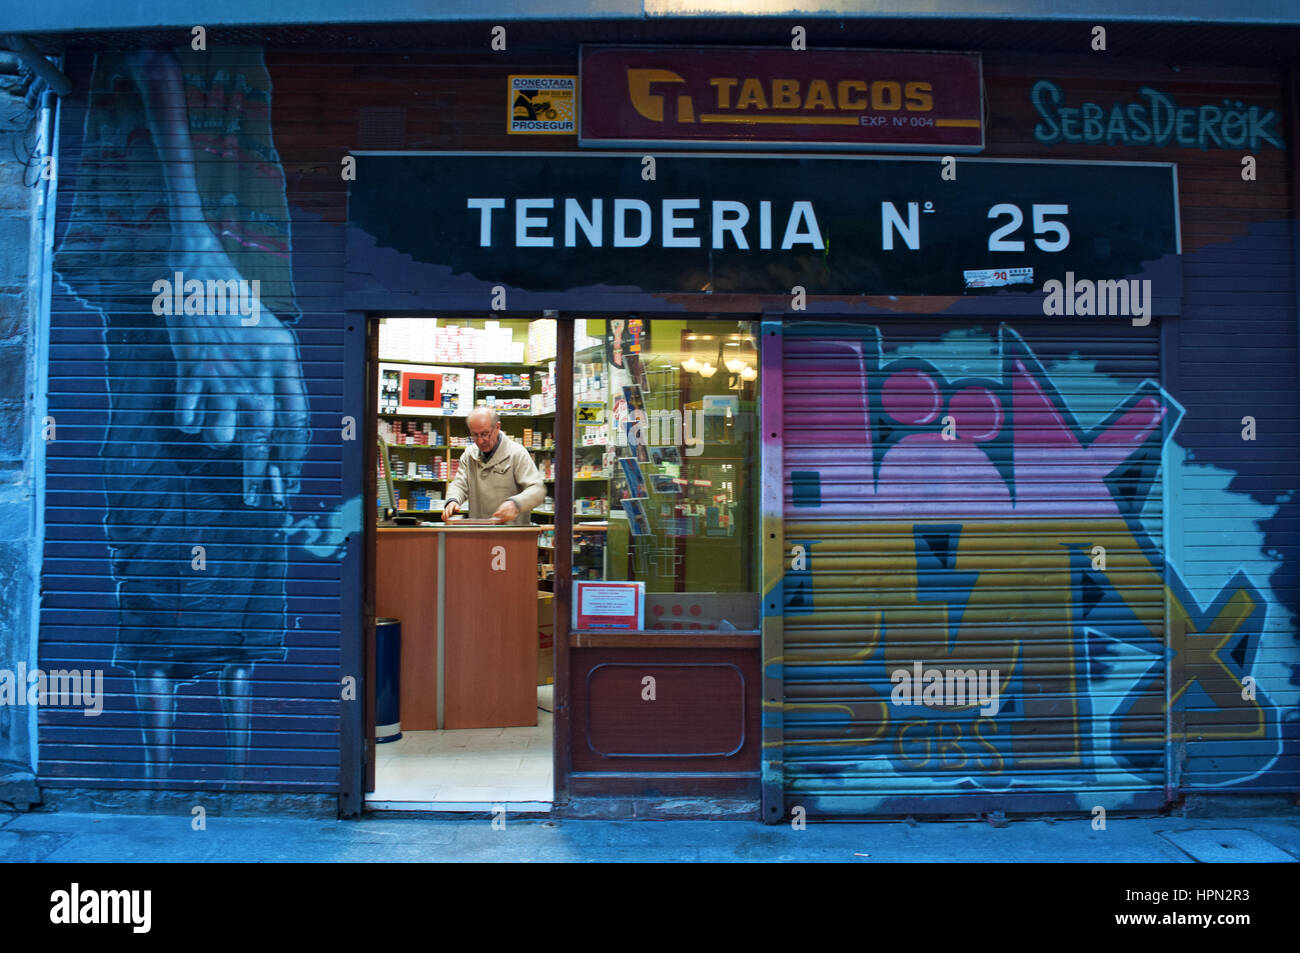 Spain: a tobacconist in his smoke shop after sunset in the center of Casco Viejo, the oldest district and the original nucleus of the city of Bilbao Stock Photo